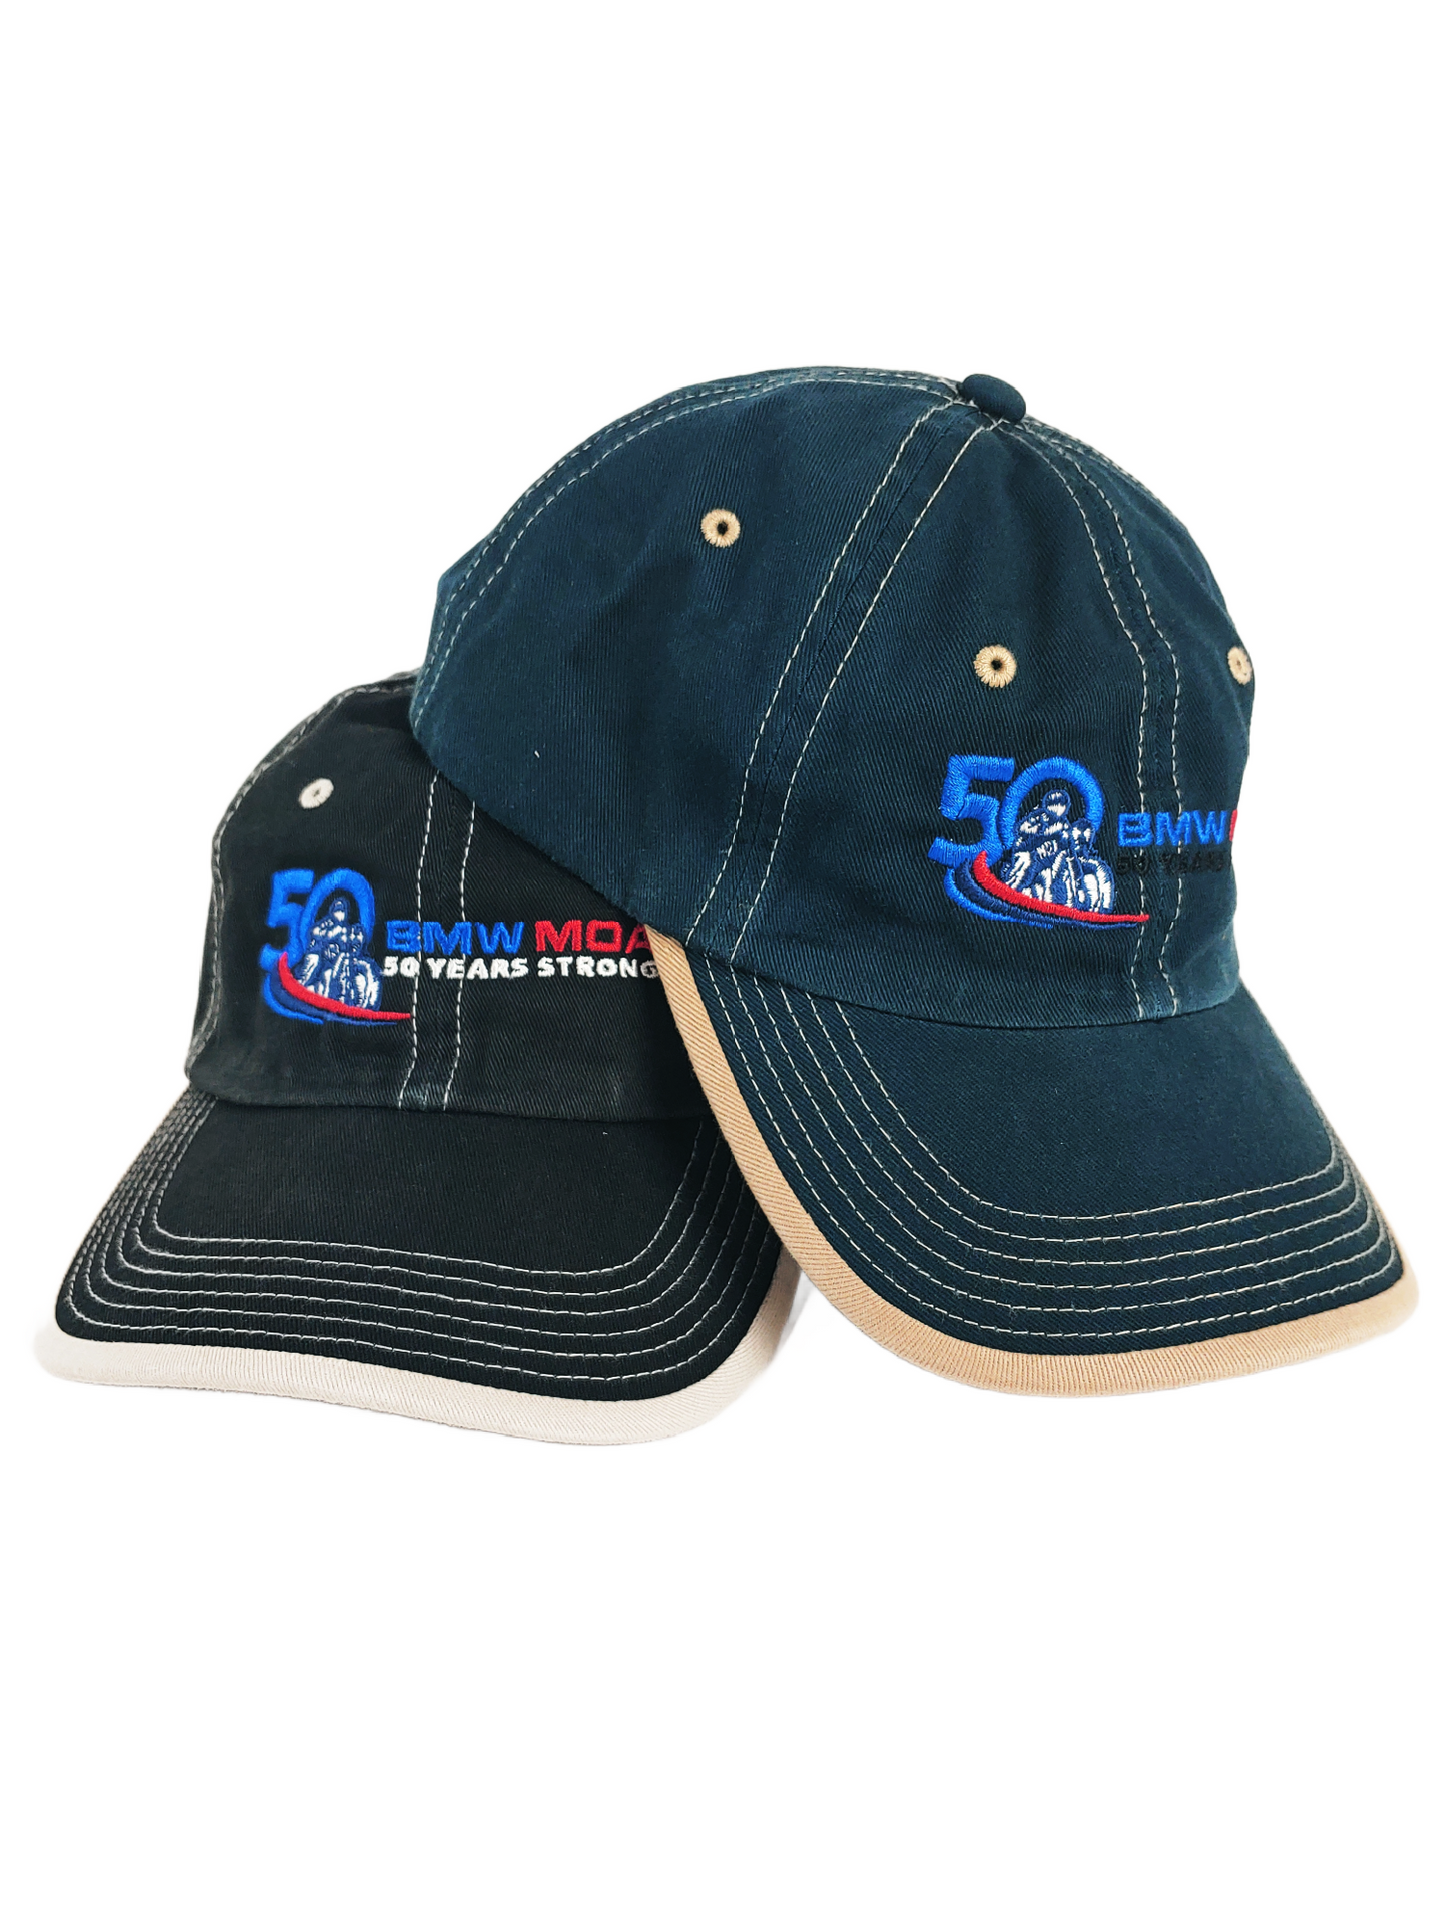 50 Years Strong - Vintage Washed Contrast Stitched - Unisex Baseball Style Hat